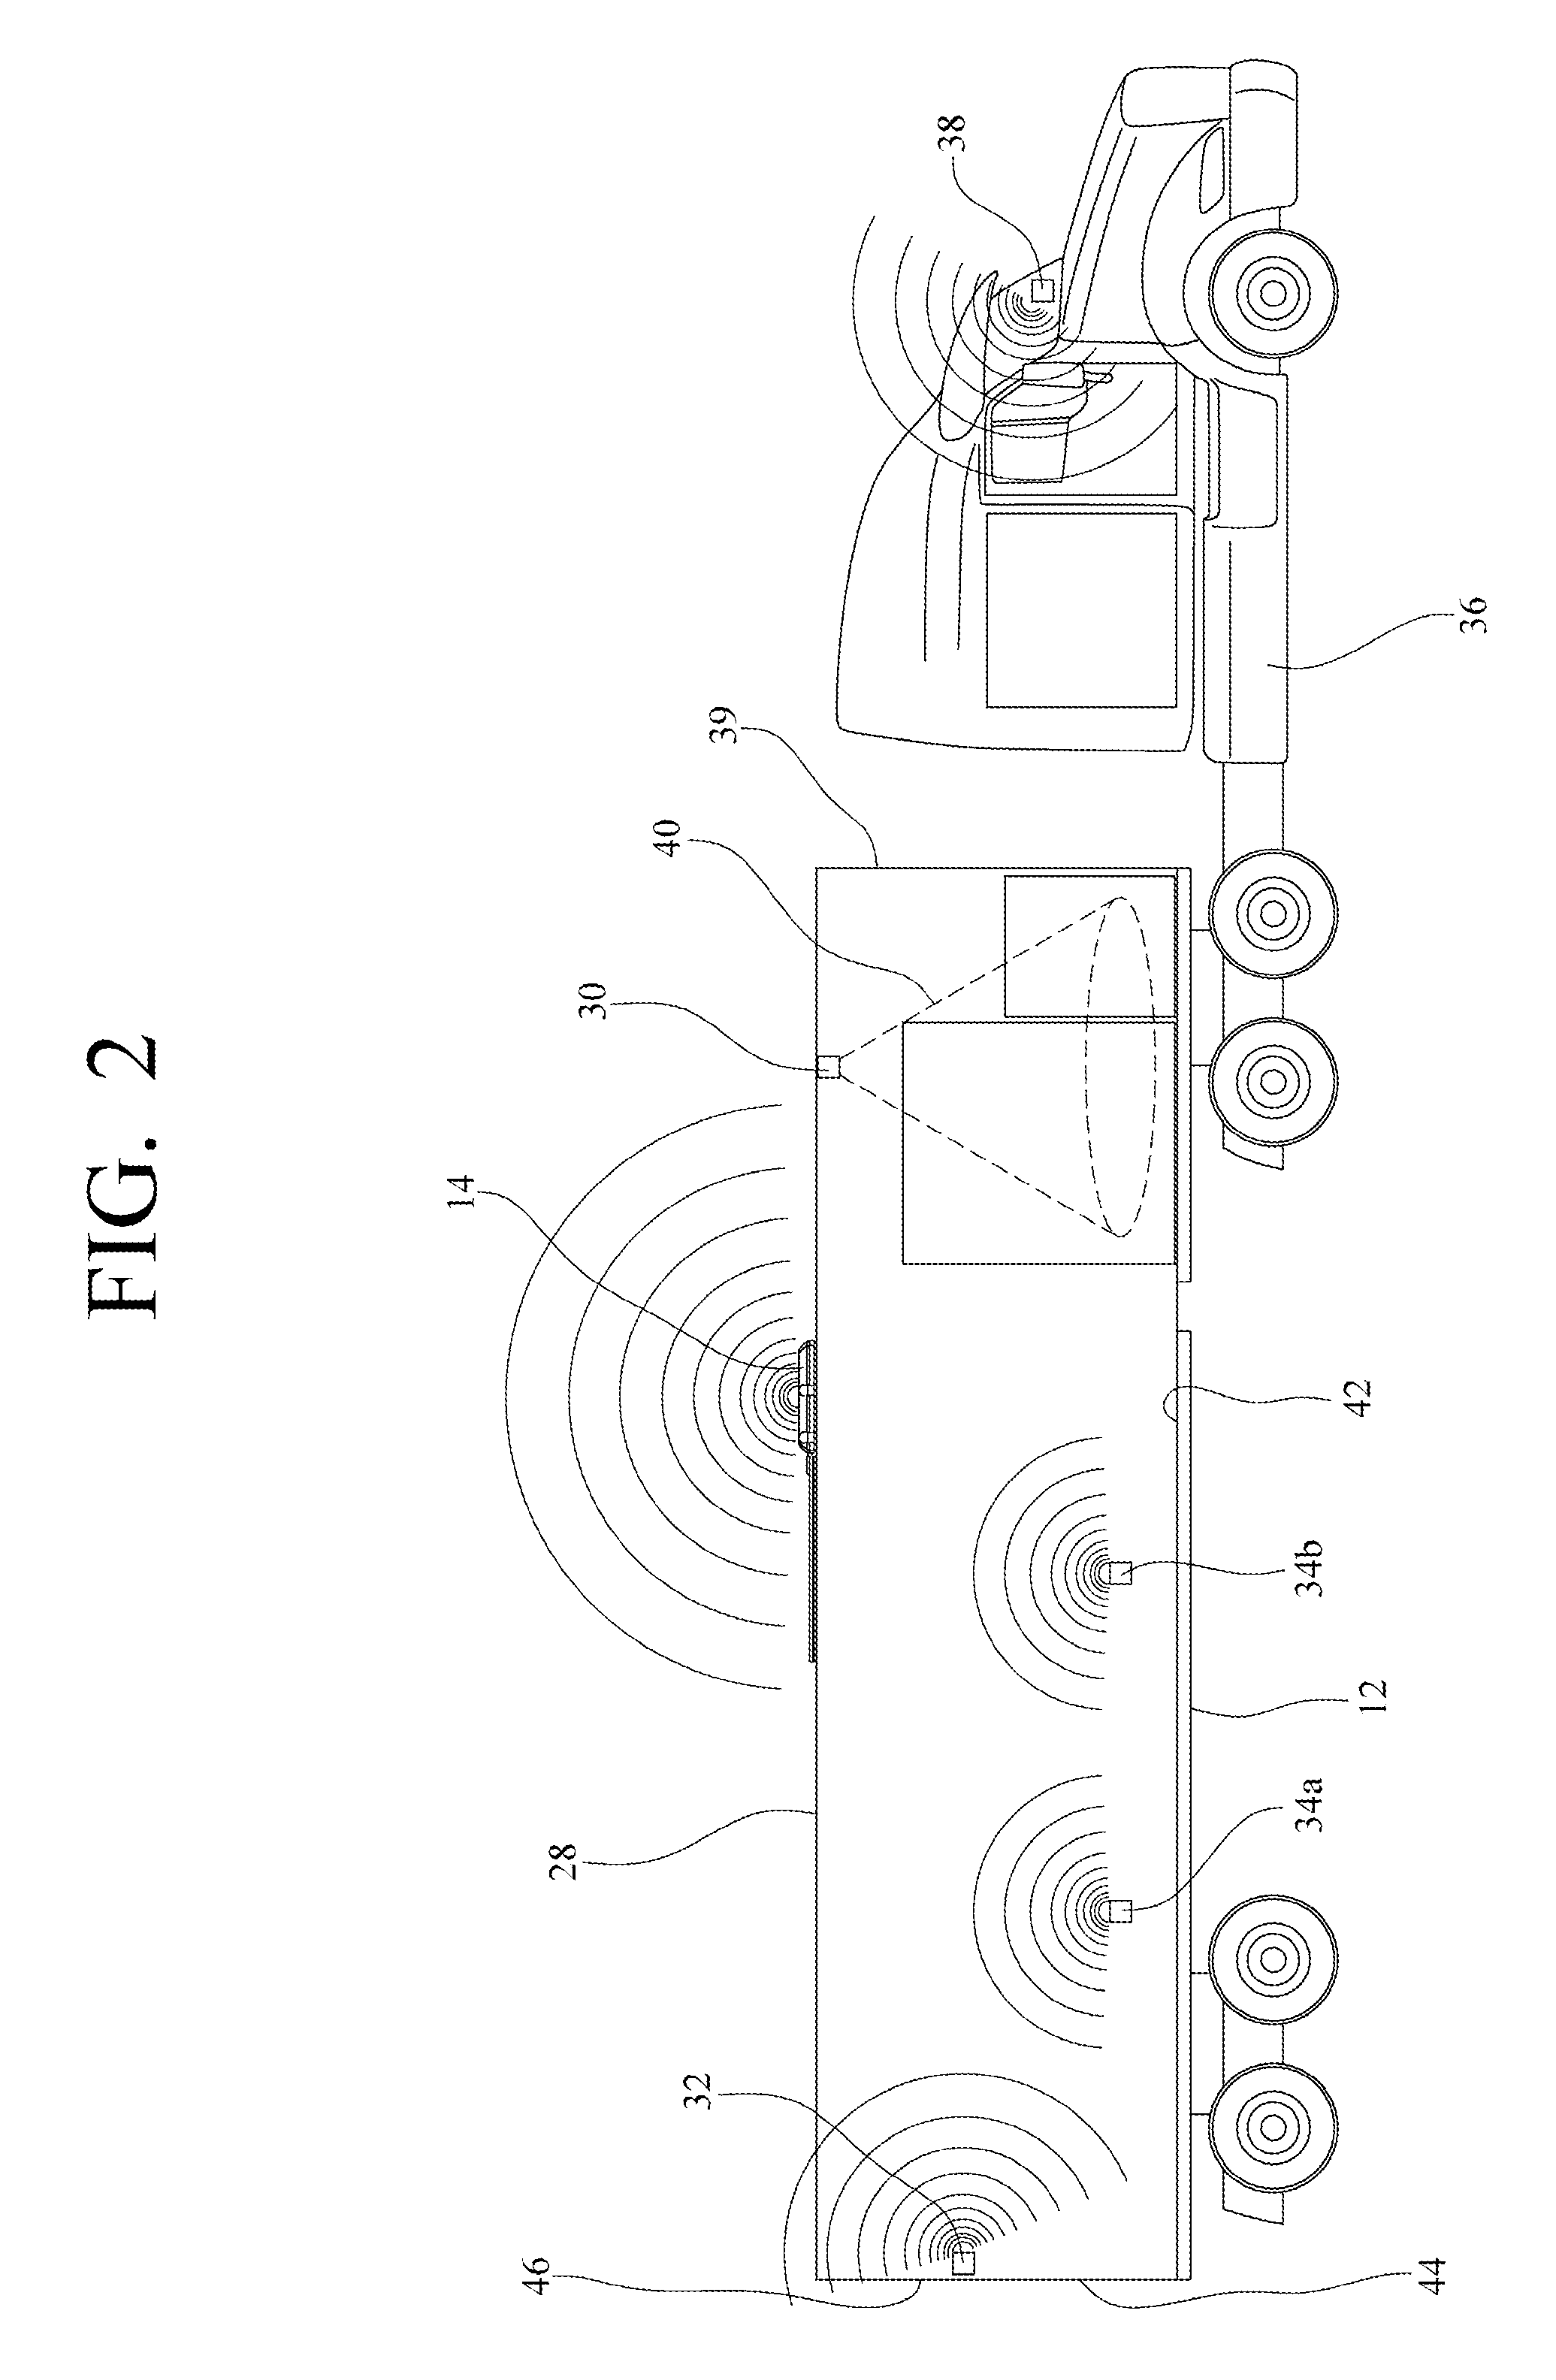 Device, system and method for tracking mobile assets